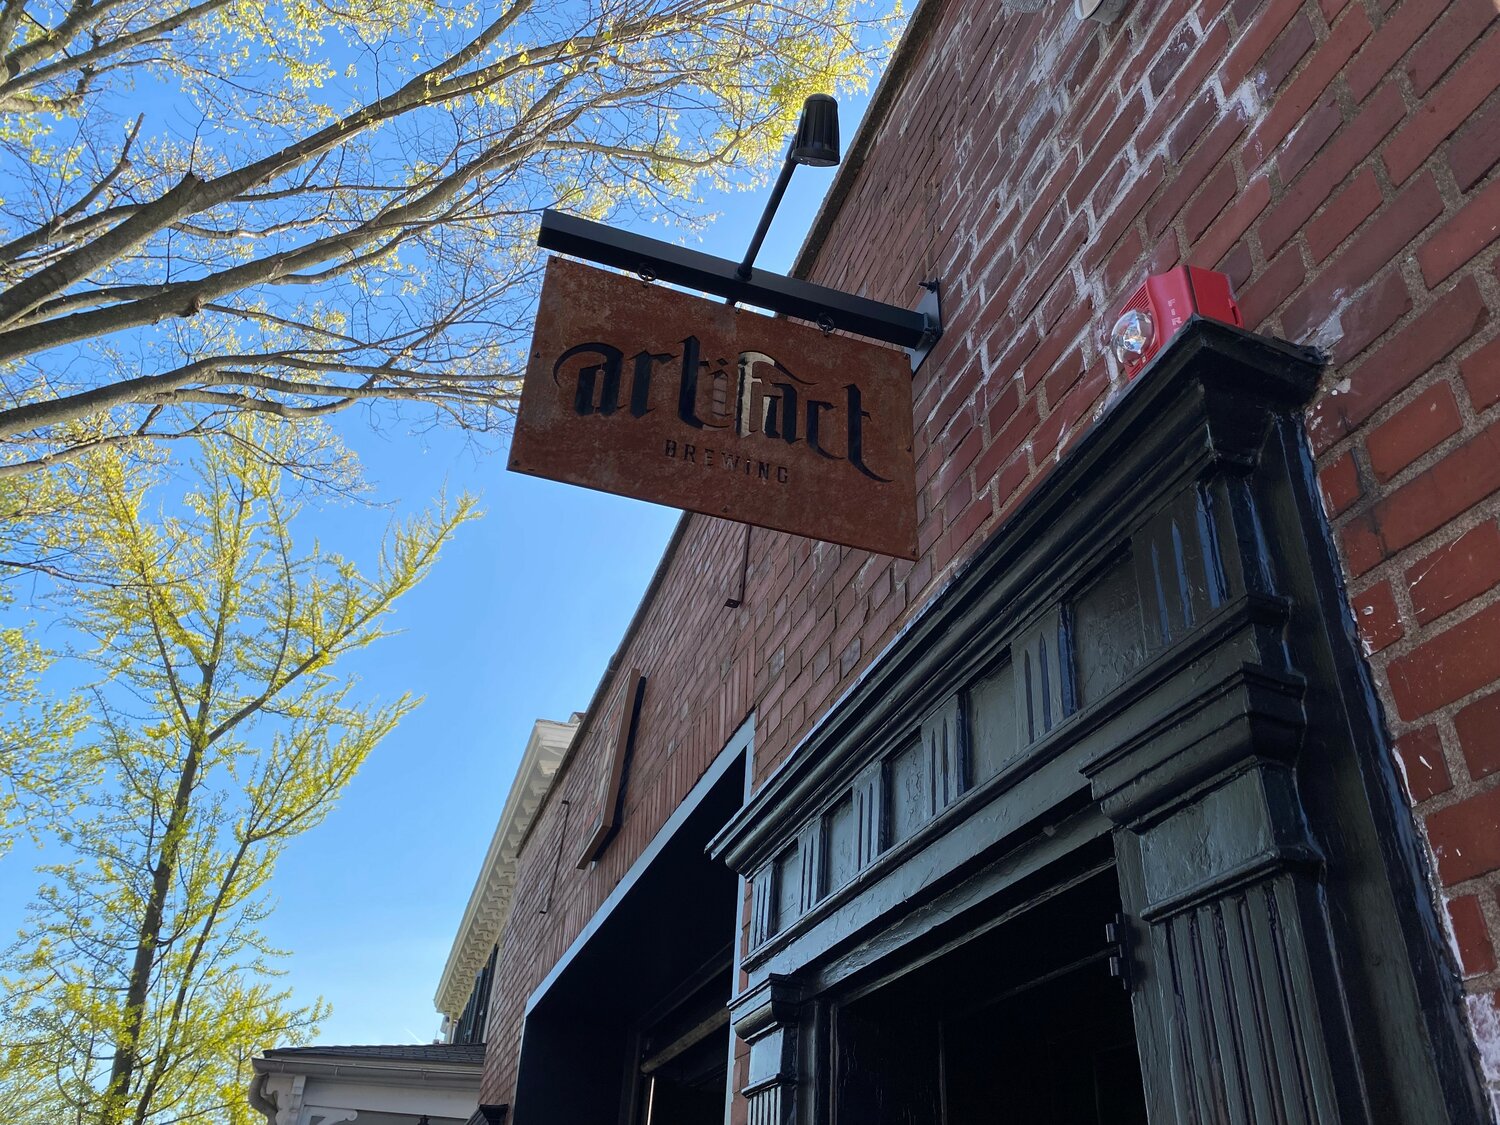 Artifact Brewing held its grand opening Friday in Doylestown Borough.